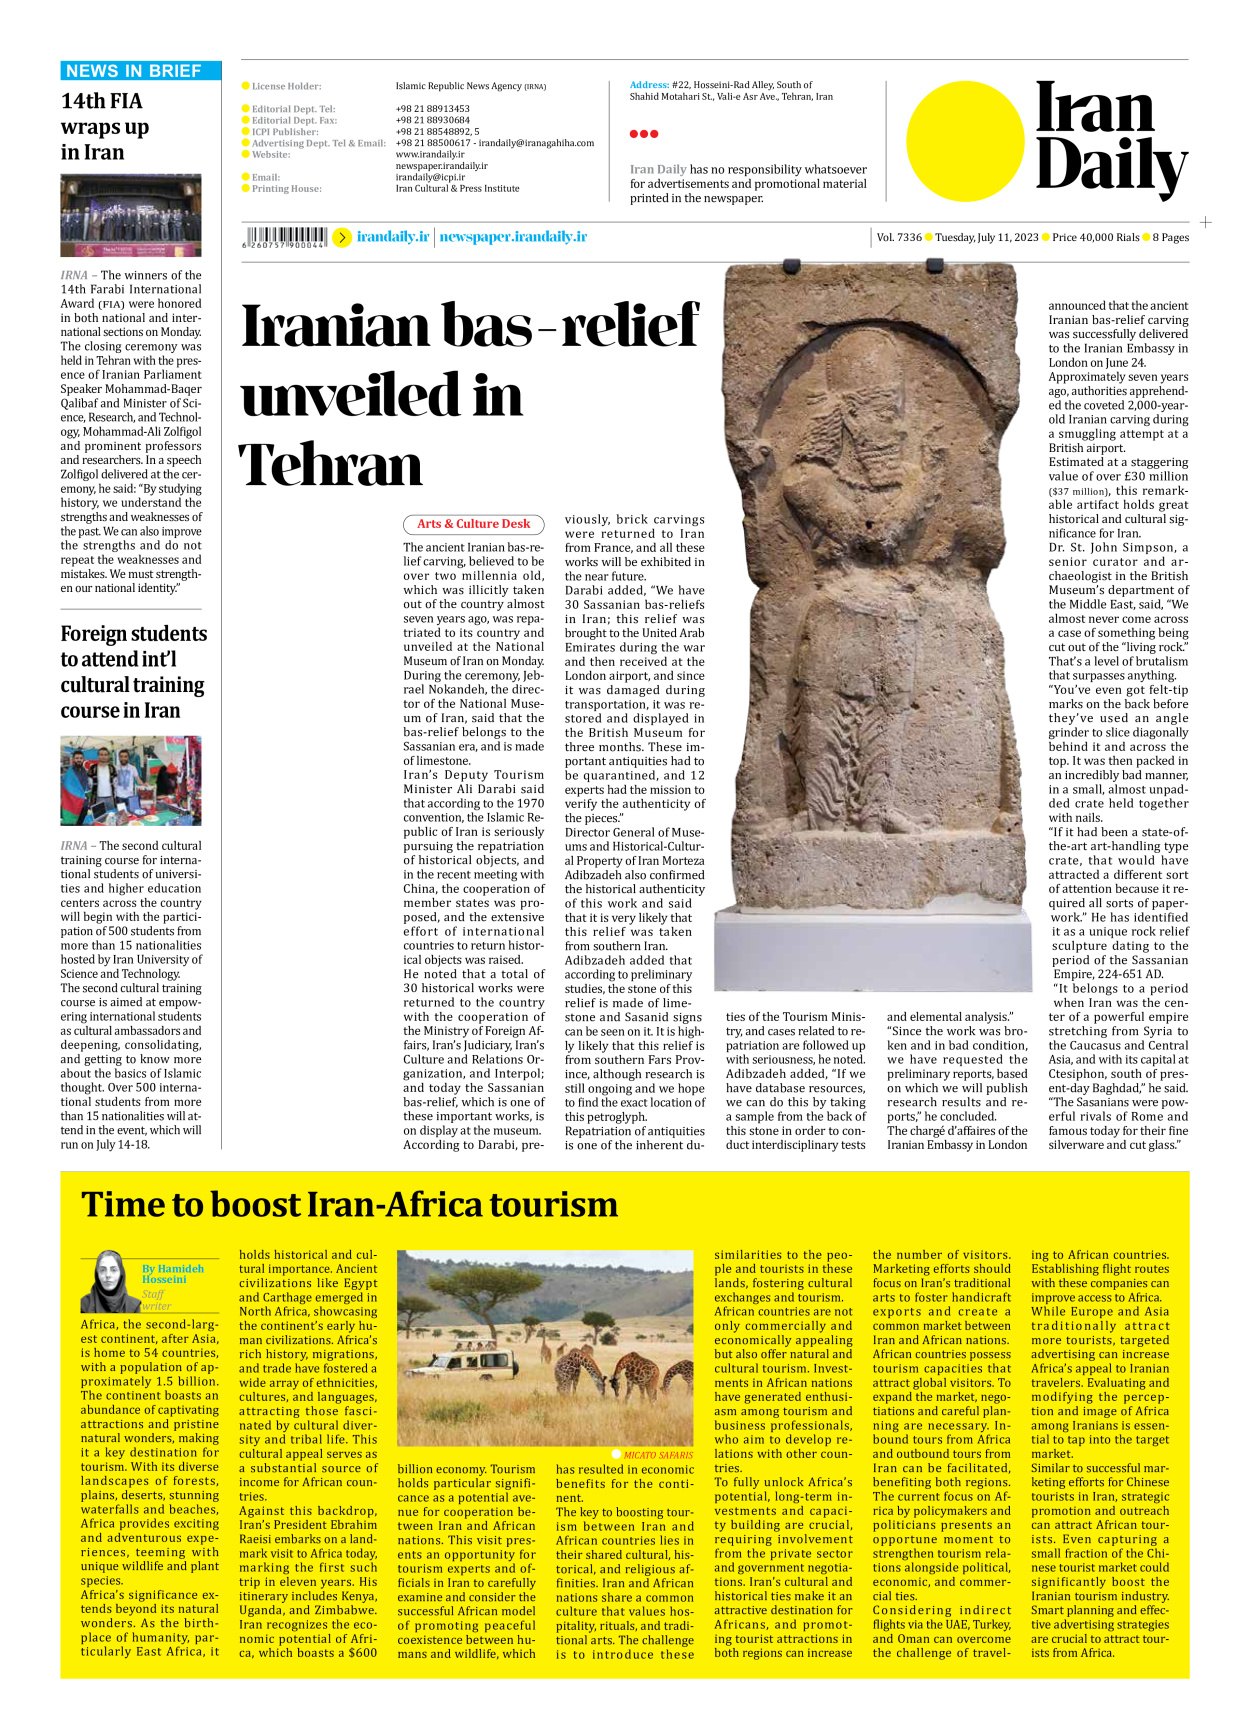 Iran Daily - Number Seven Thousand Three Hundred and Thirty Six - 11 July 2023 - Page 8